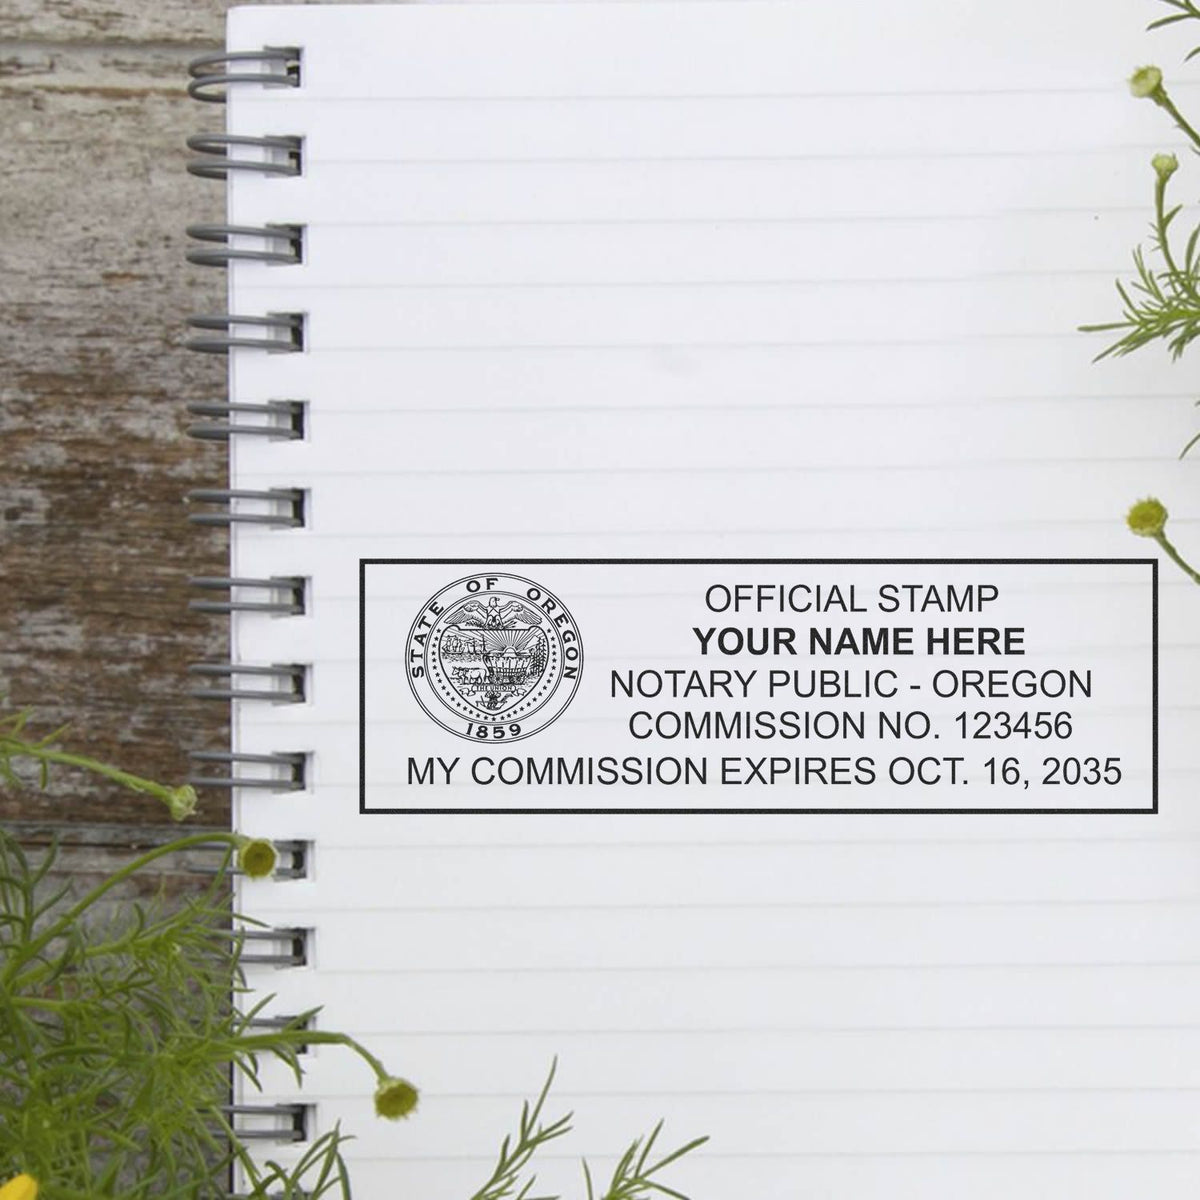 An alternative view of the PSI Oregon Notary Stamp stamped on a sheet of paper showing the image in use